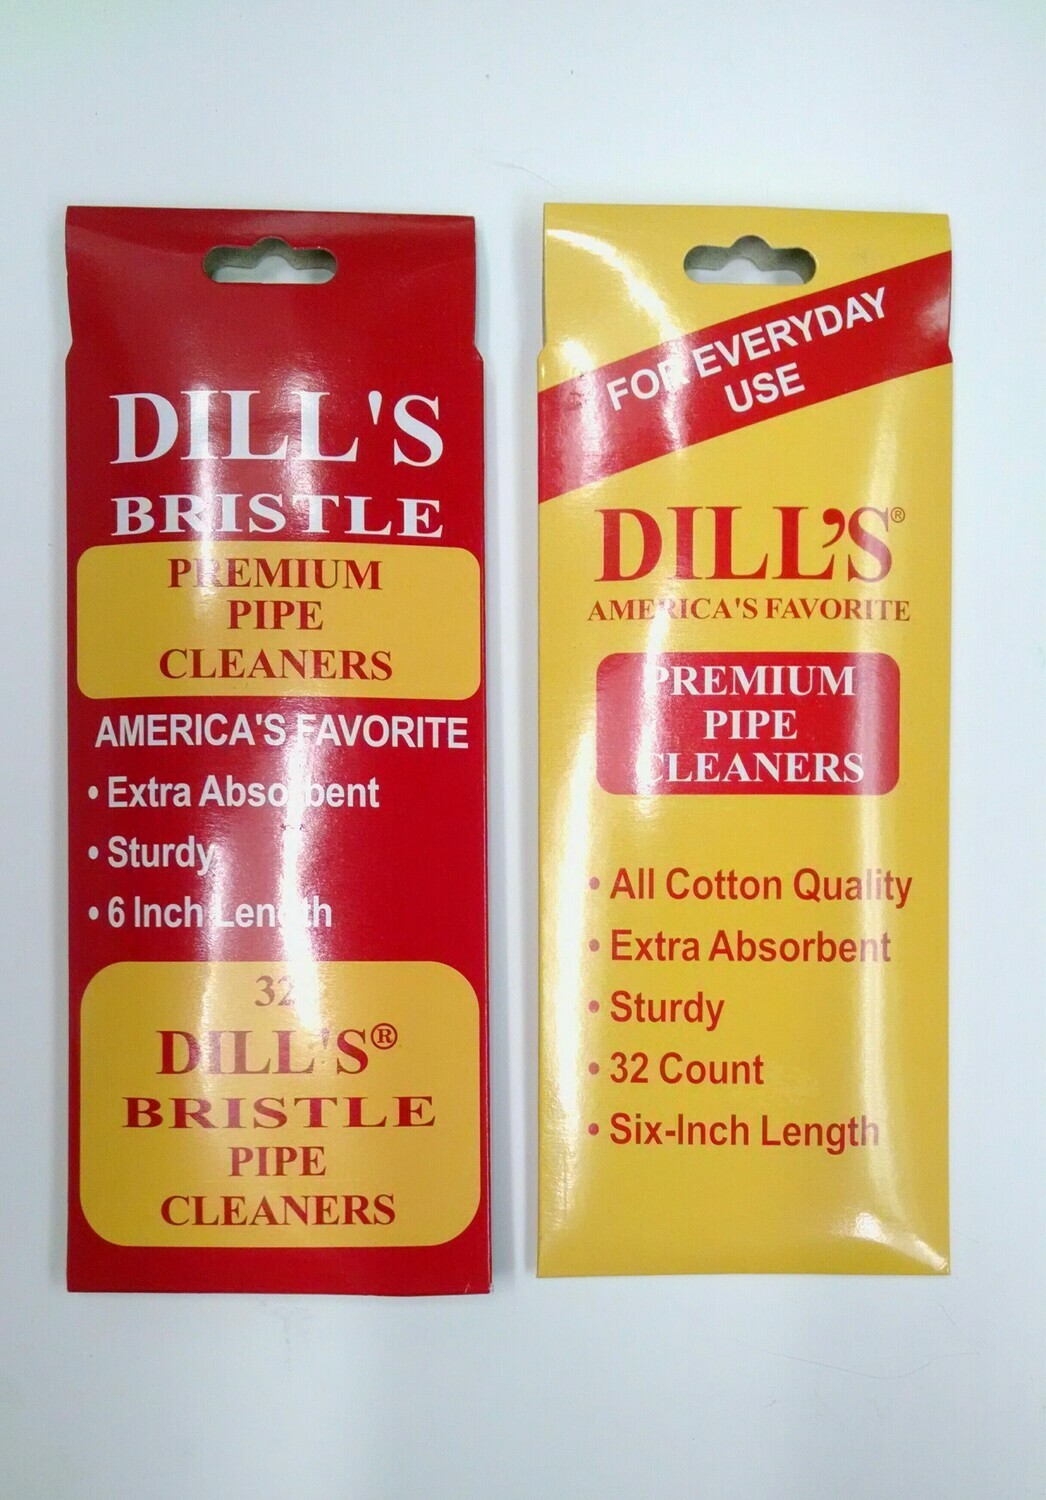 DILL'S Bristle or Standard Pipe Cleaners